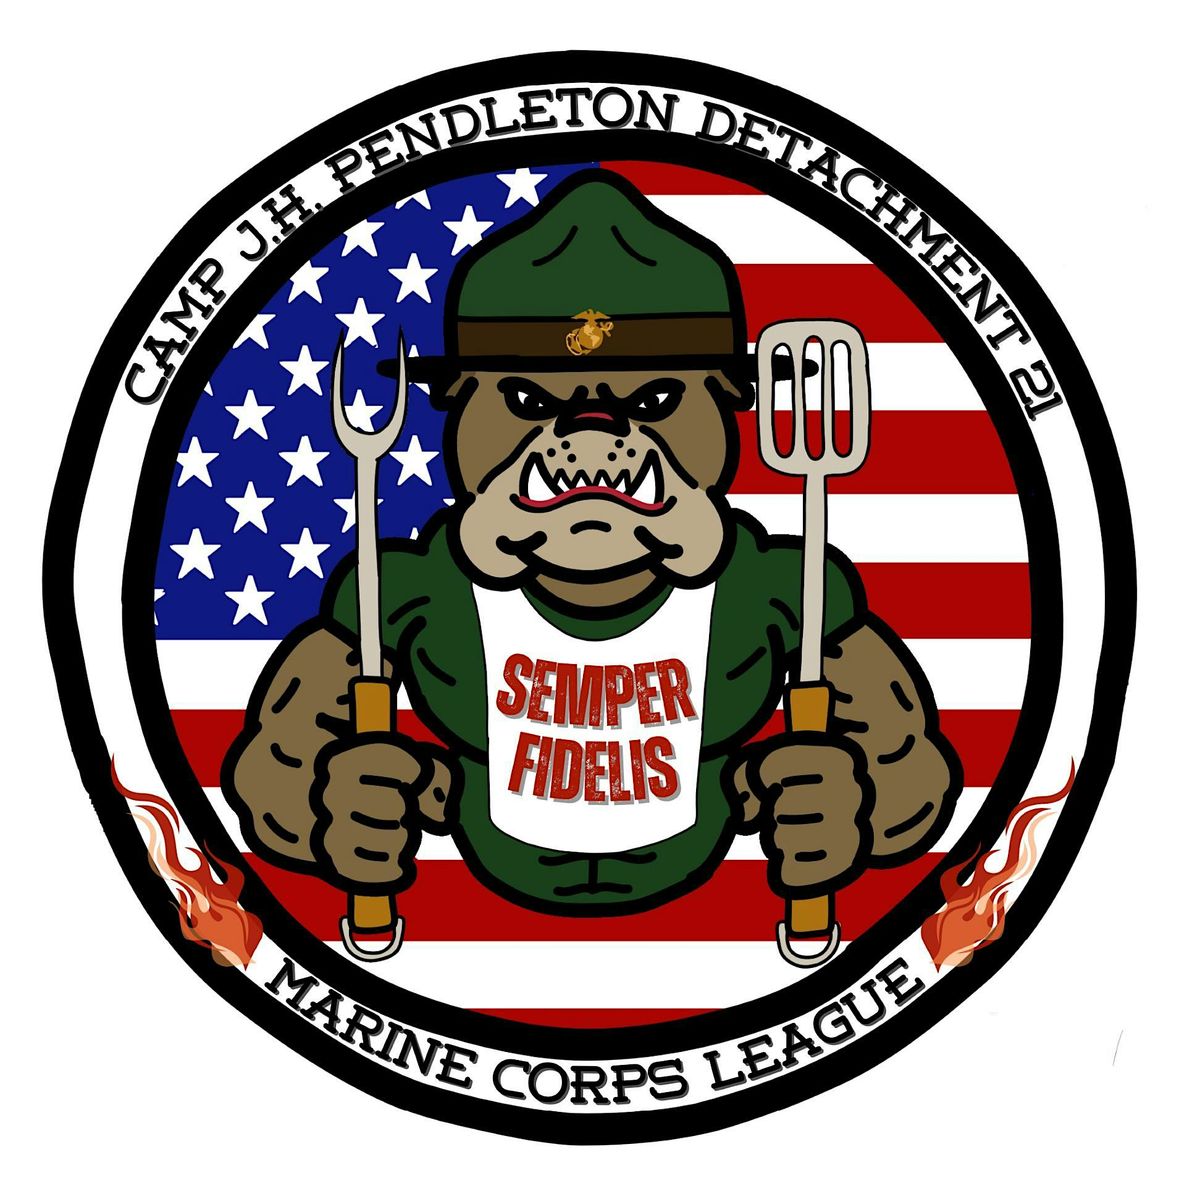 Marine Corps League BBQ Competition